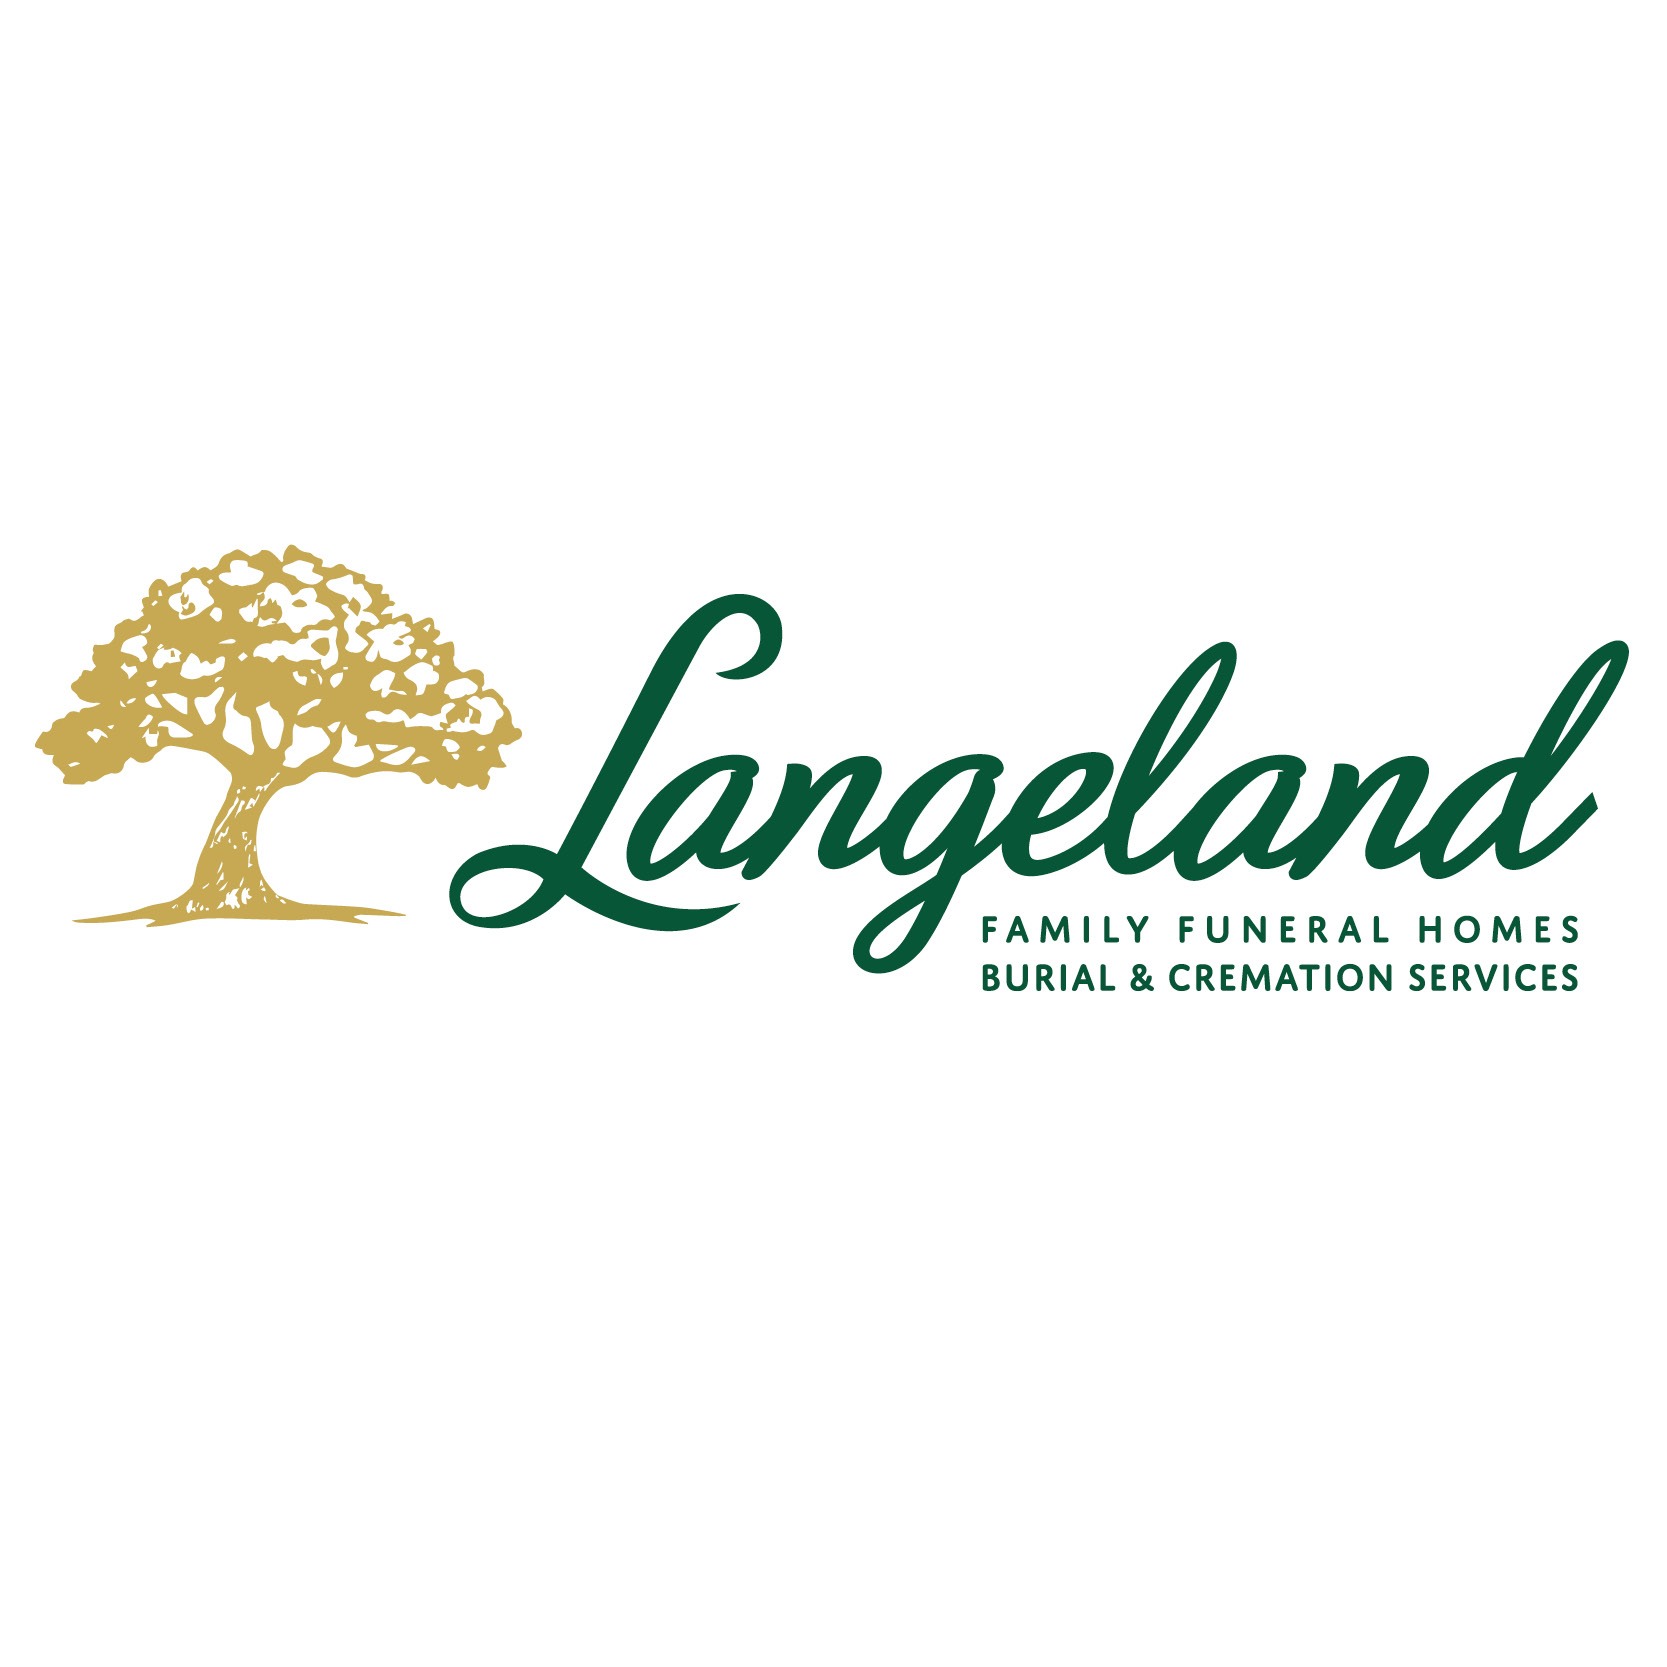 Langeland Family Funeral Homes Burial & Cremation Services